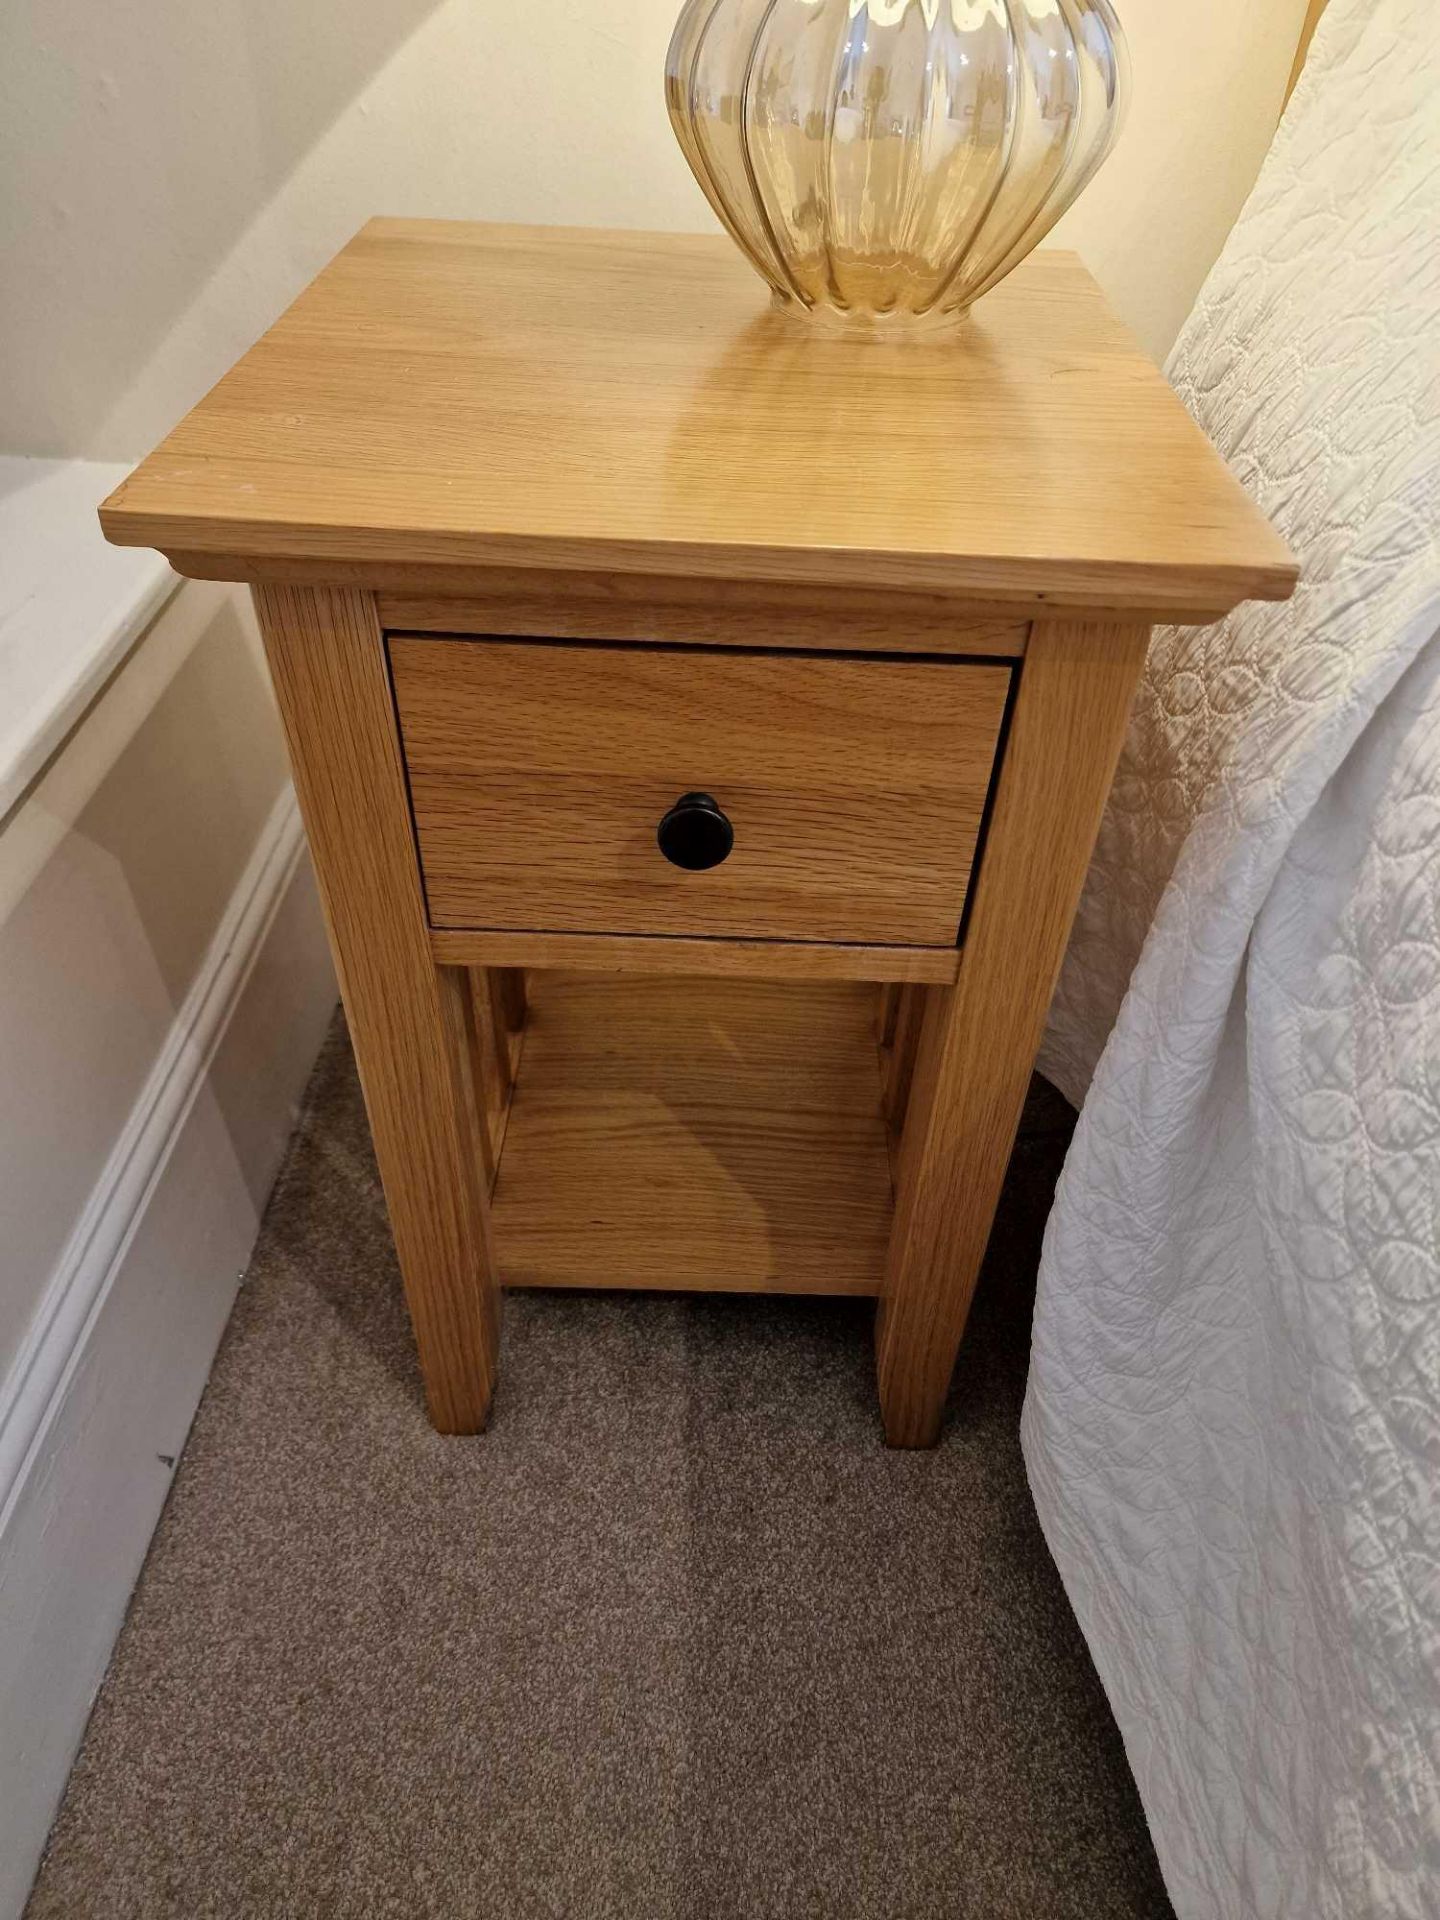 A Pair Of Pine Single Drawer Nightstand With Undershelf 38 x 40cm